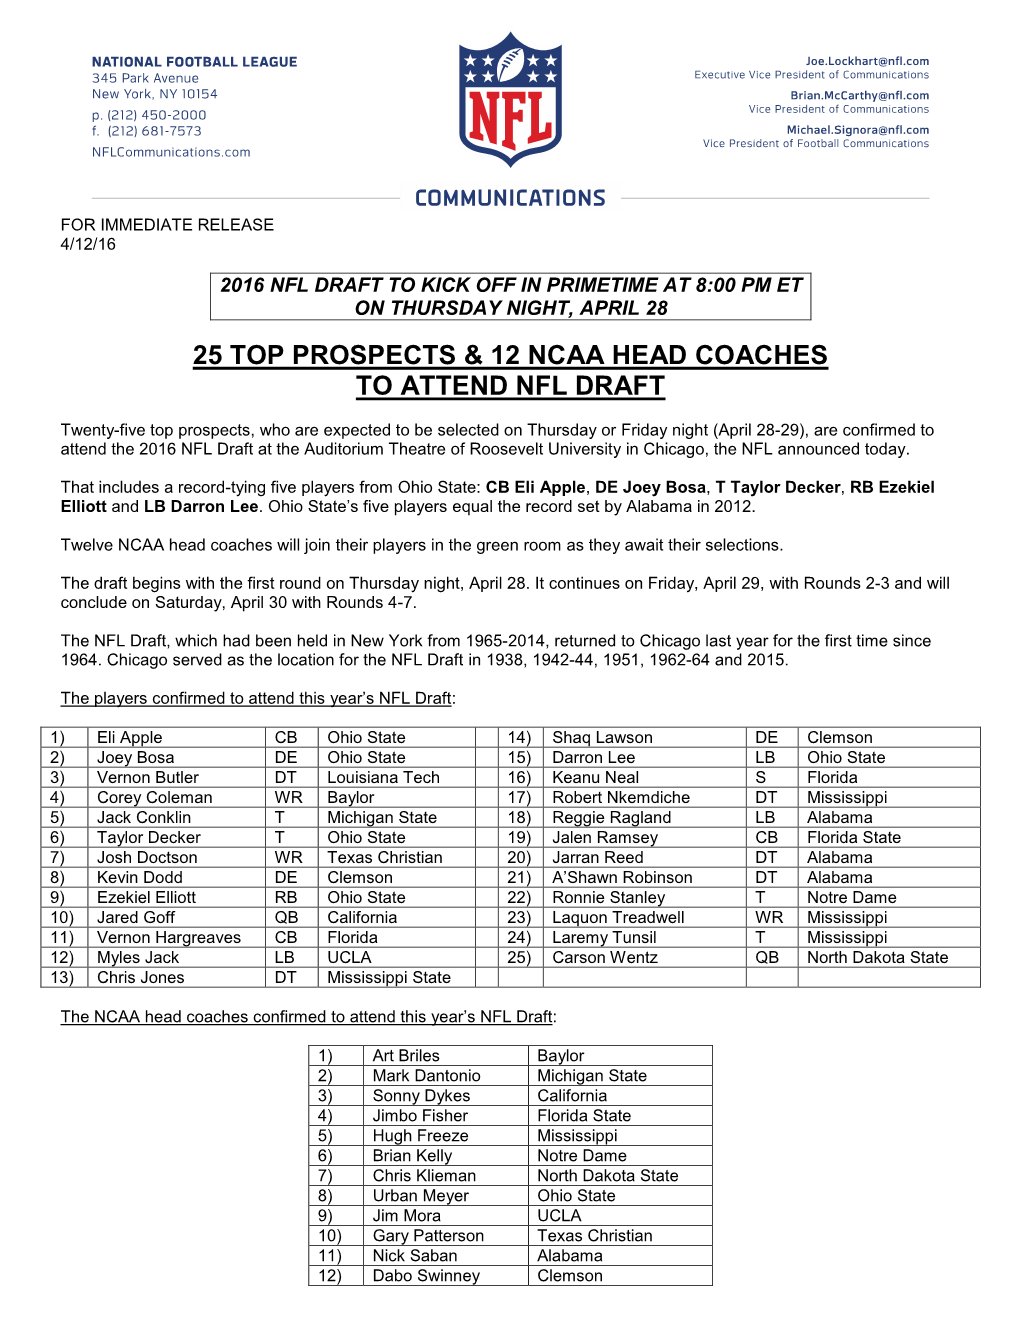 25 Top Prospects & 12 Ncaa Head Coaches to Attend